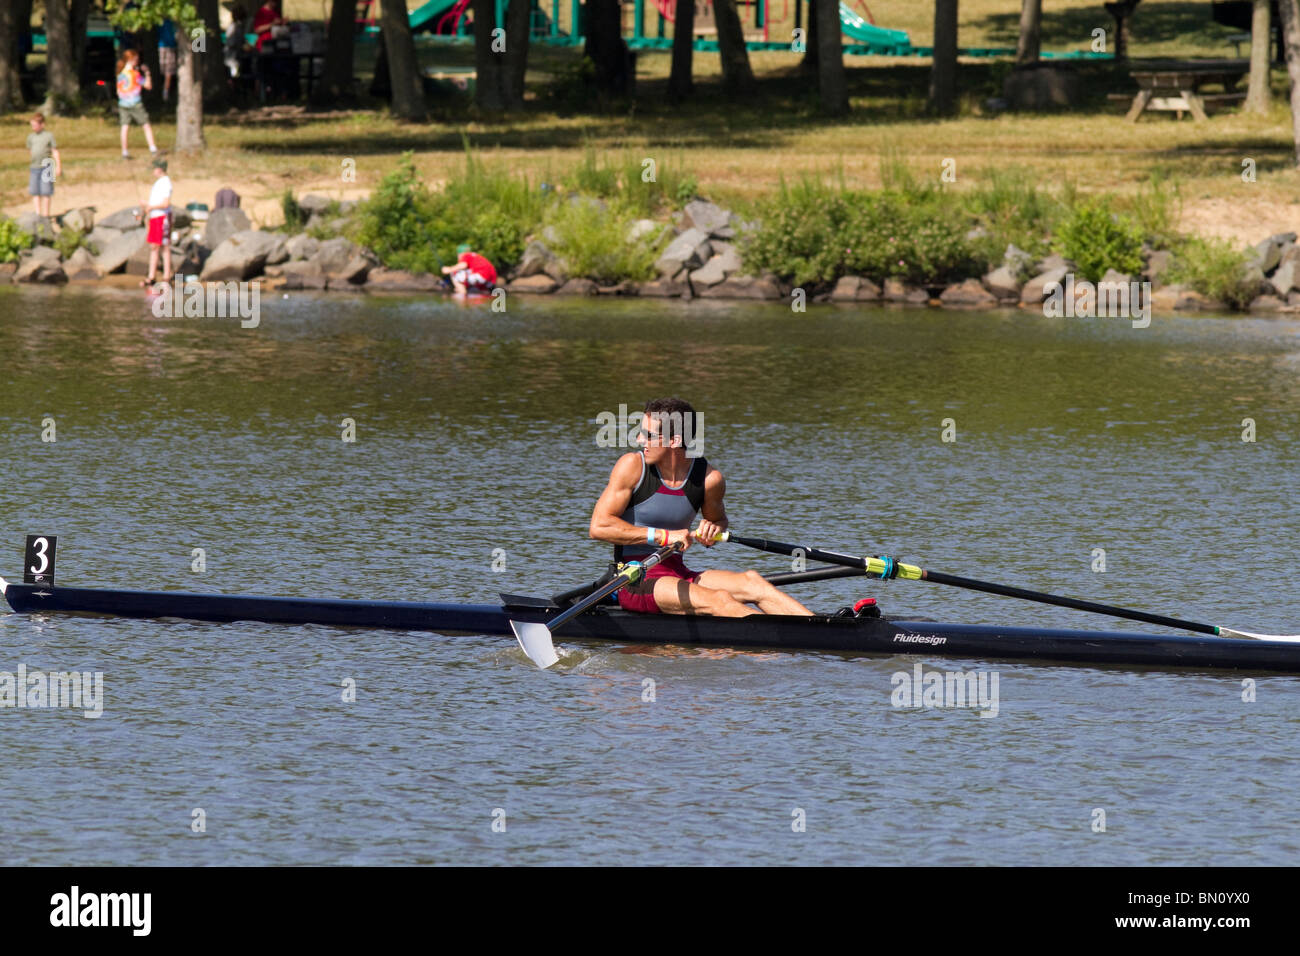 A Young male rower at the US Rowing National Championship Regatta at Mercer County Park New Jersey. Lake Mercer. Stock Photo